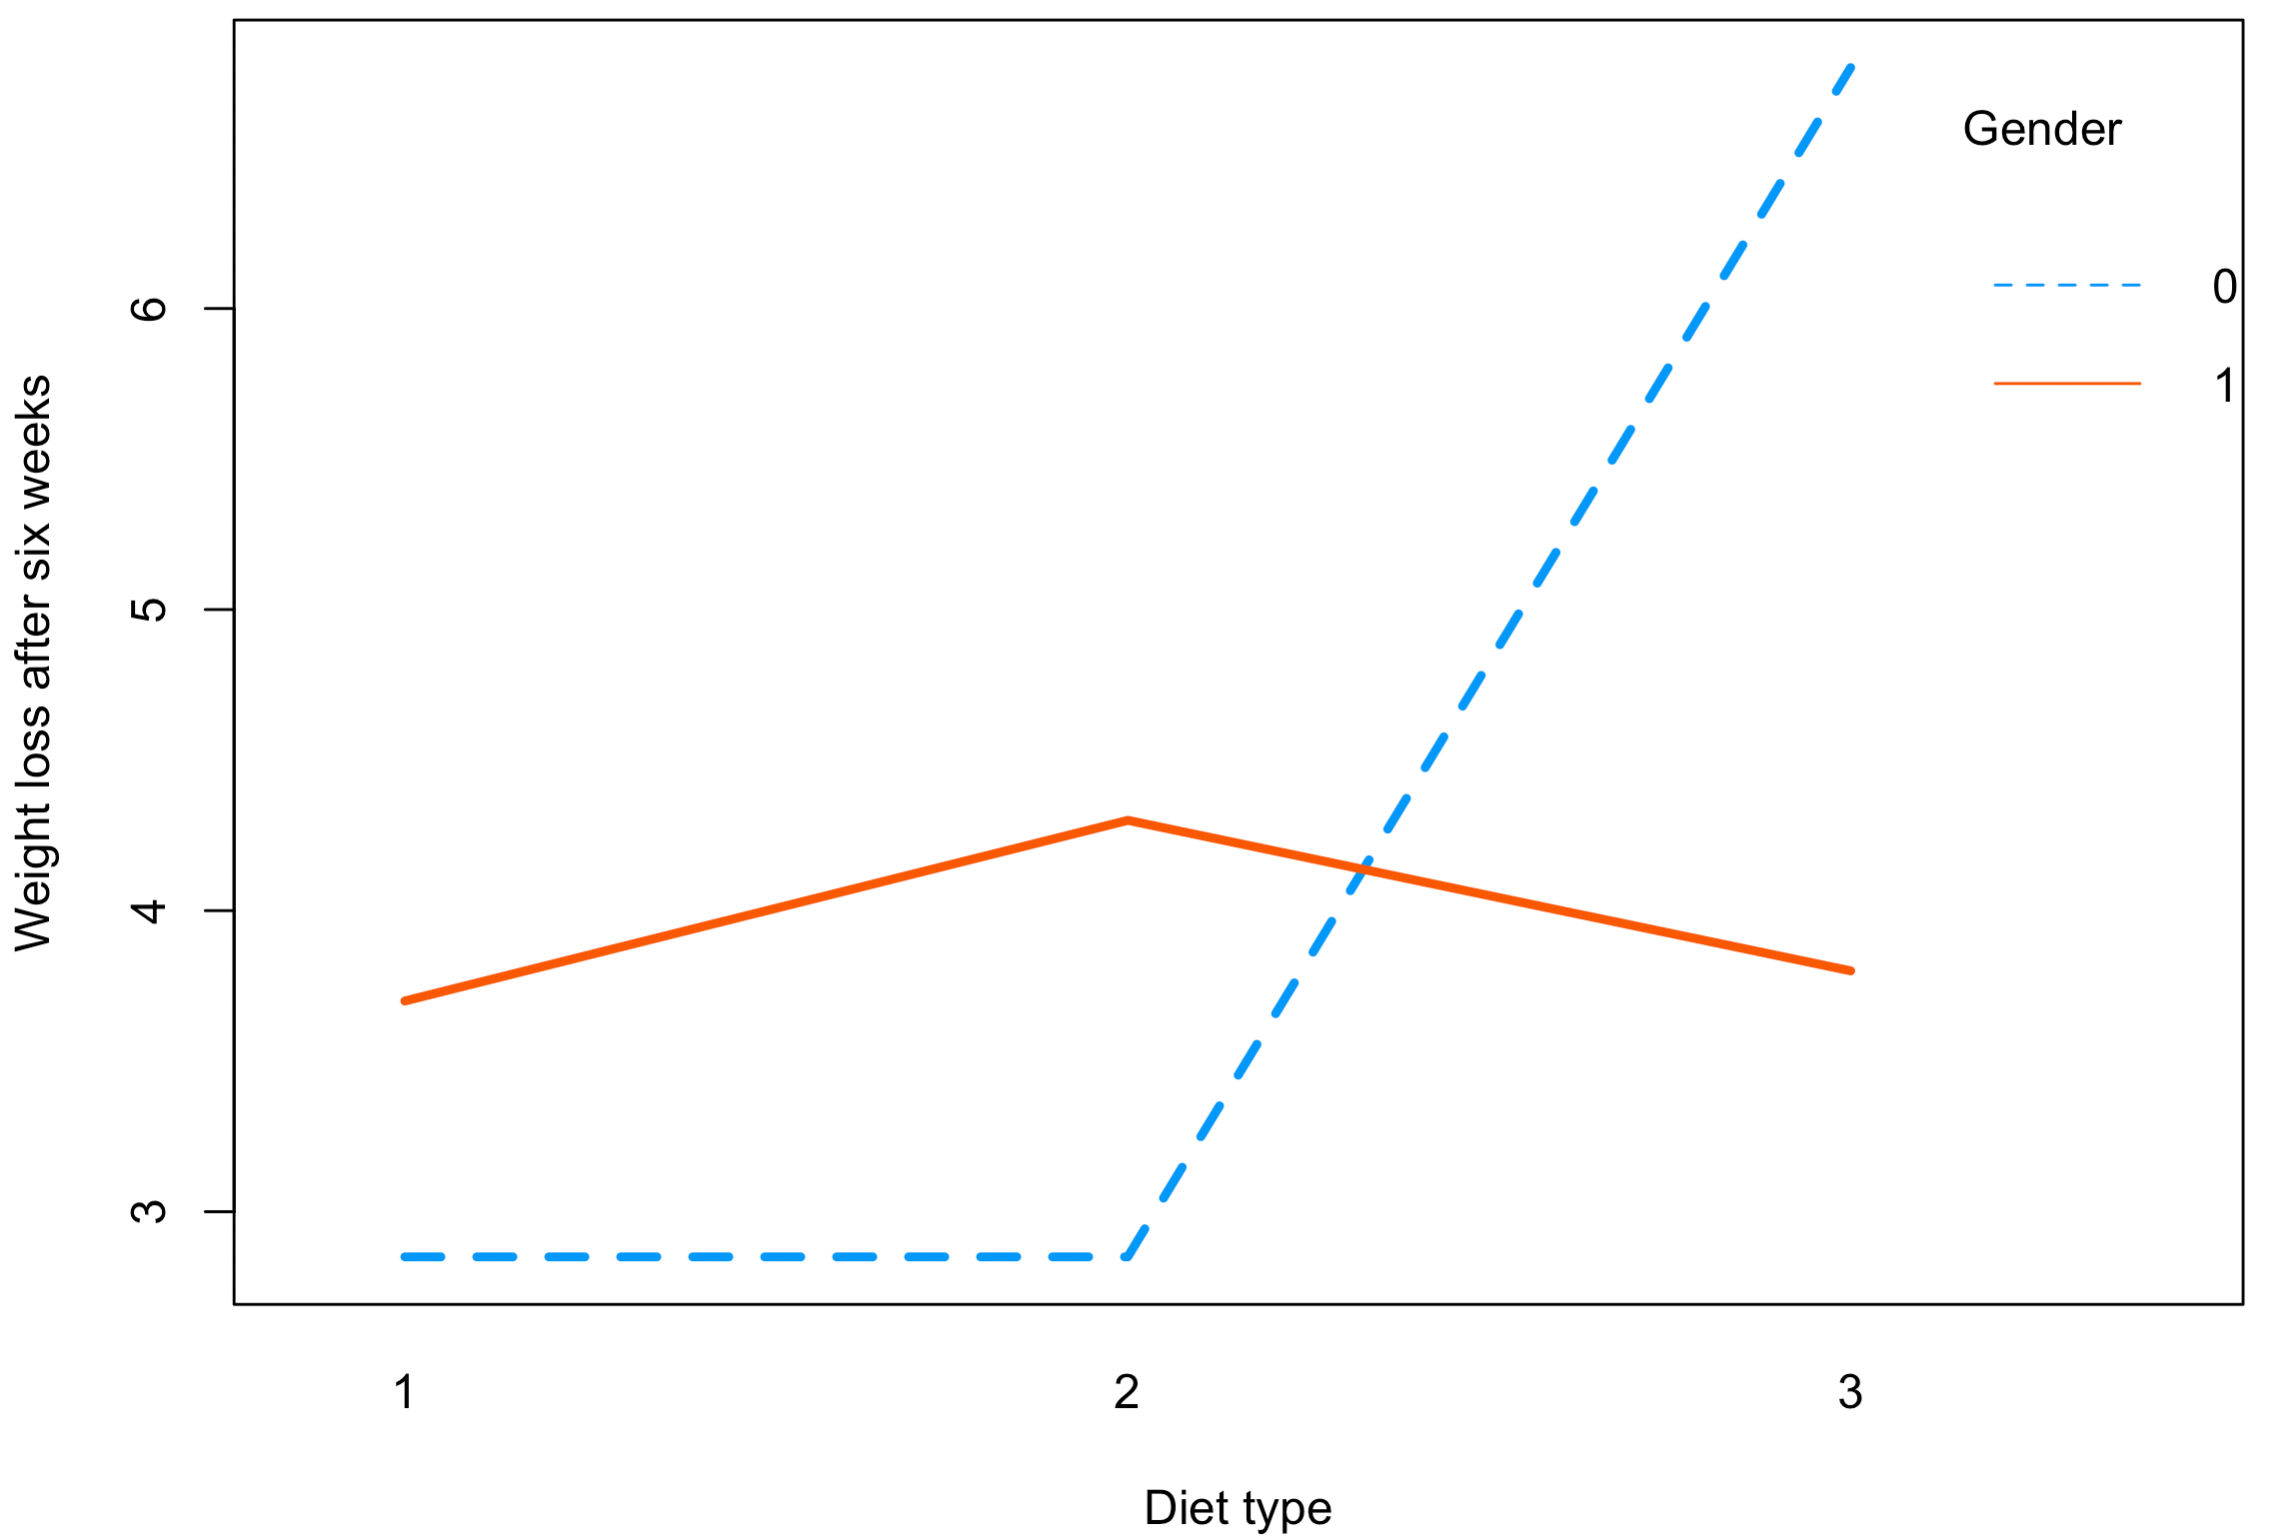 Image 4 - Interaction plot of weight loss and diet type per gender